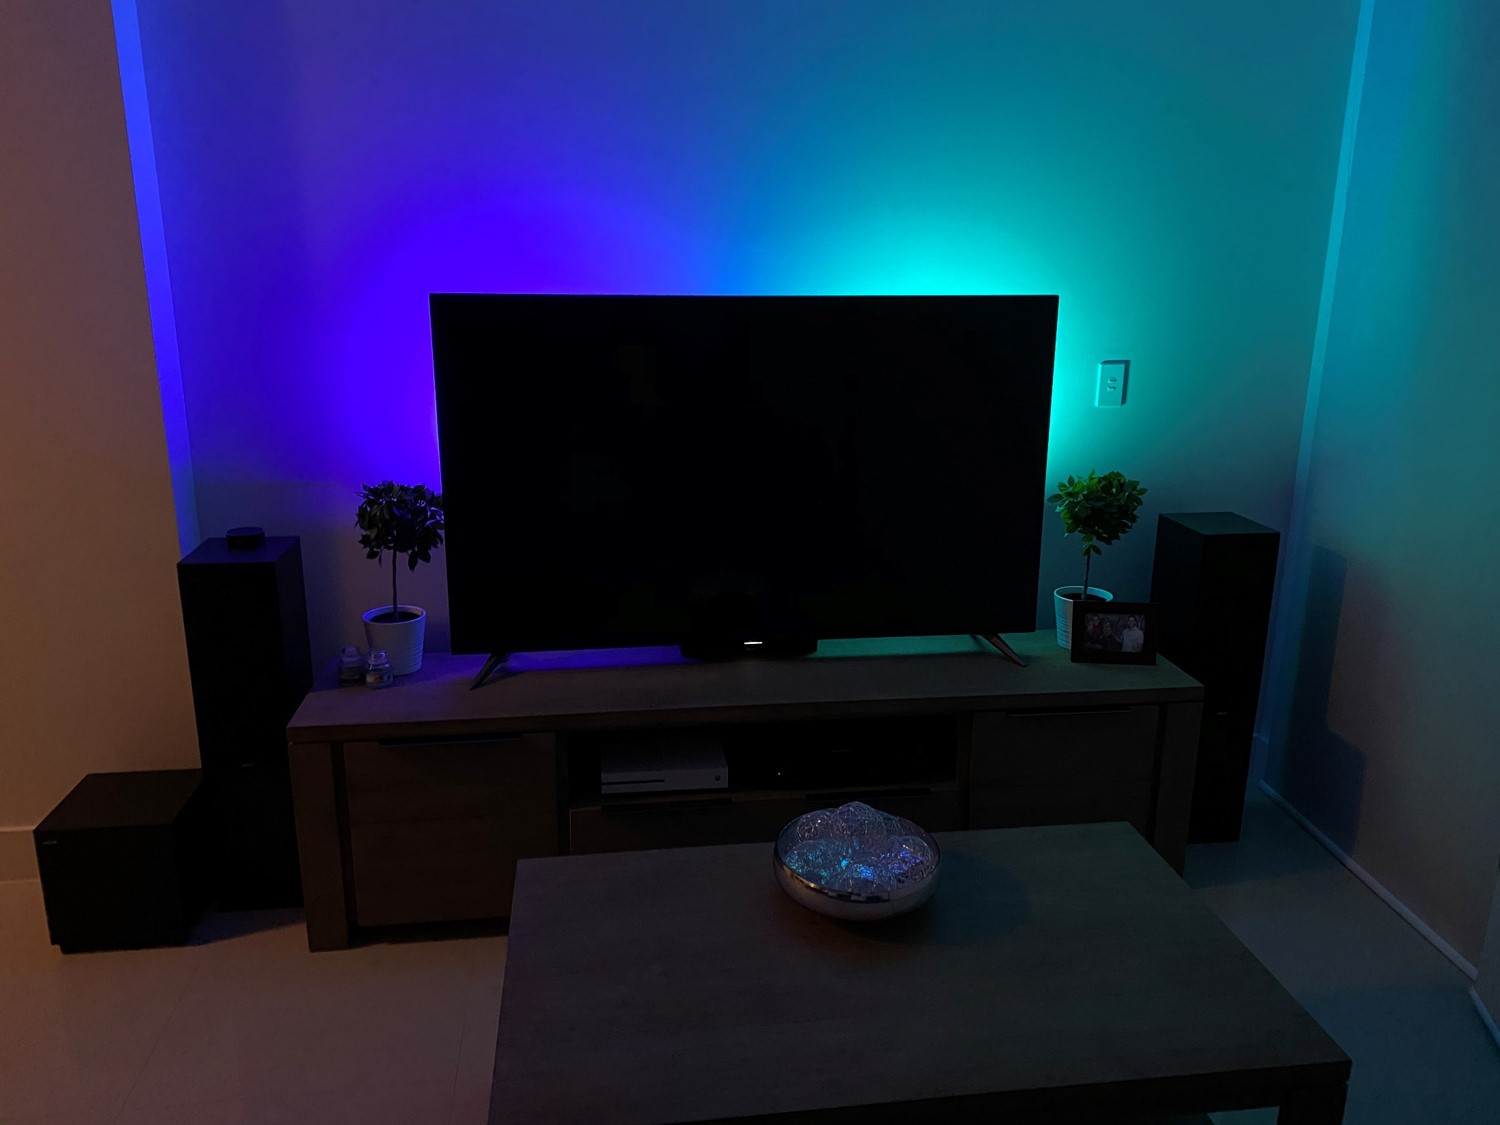 Philips Hue Bars One Blue and One Turquoise